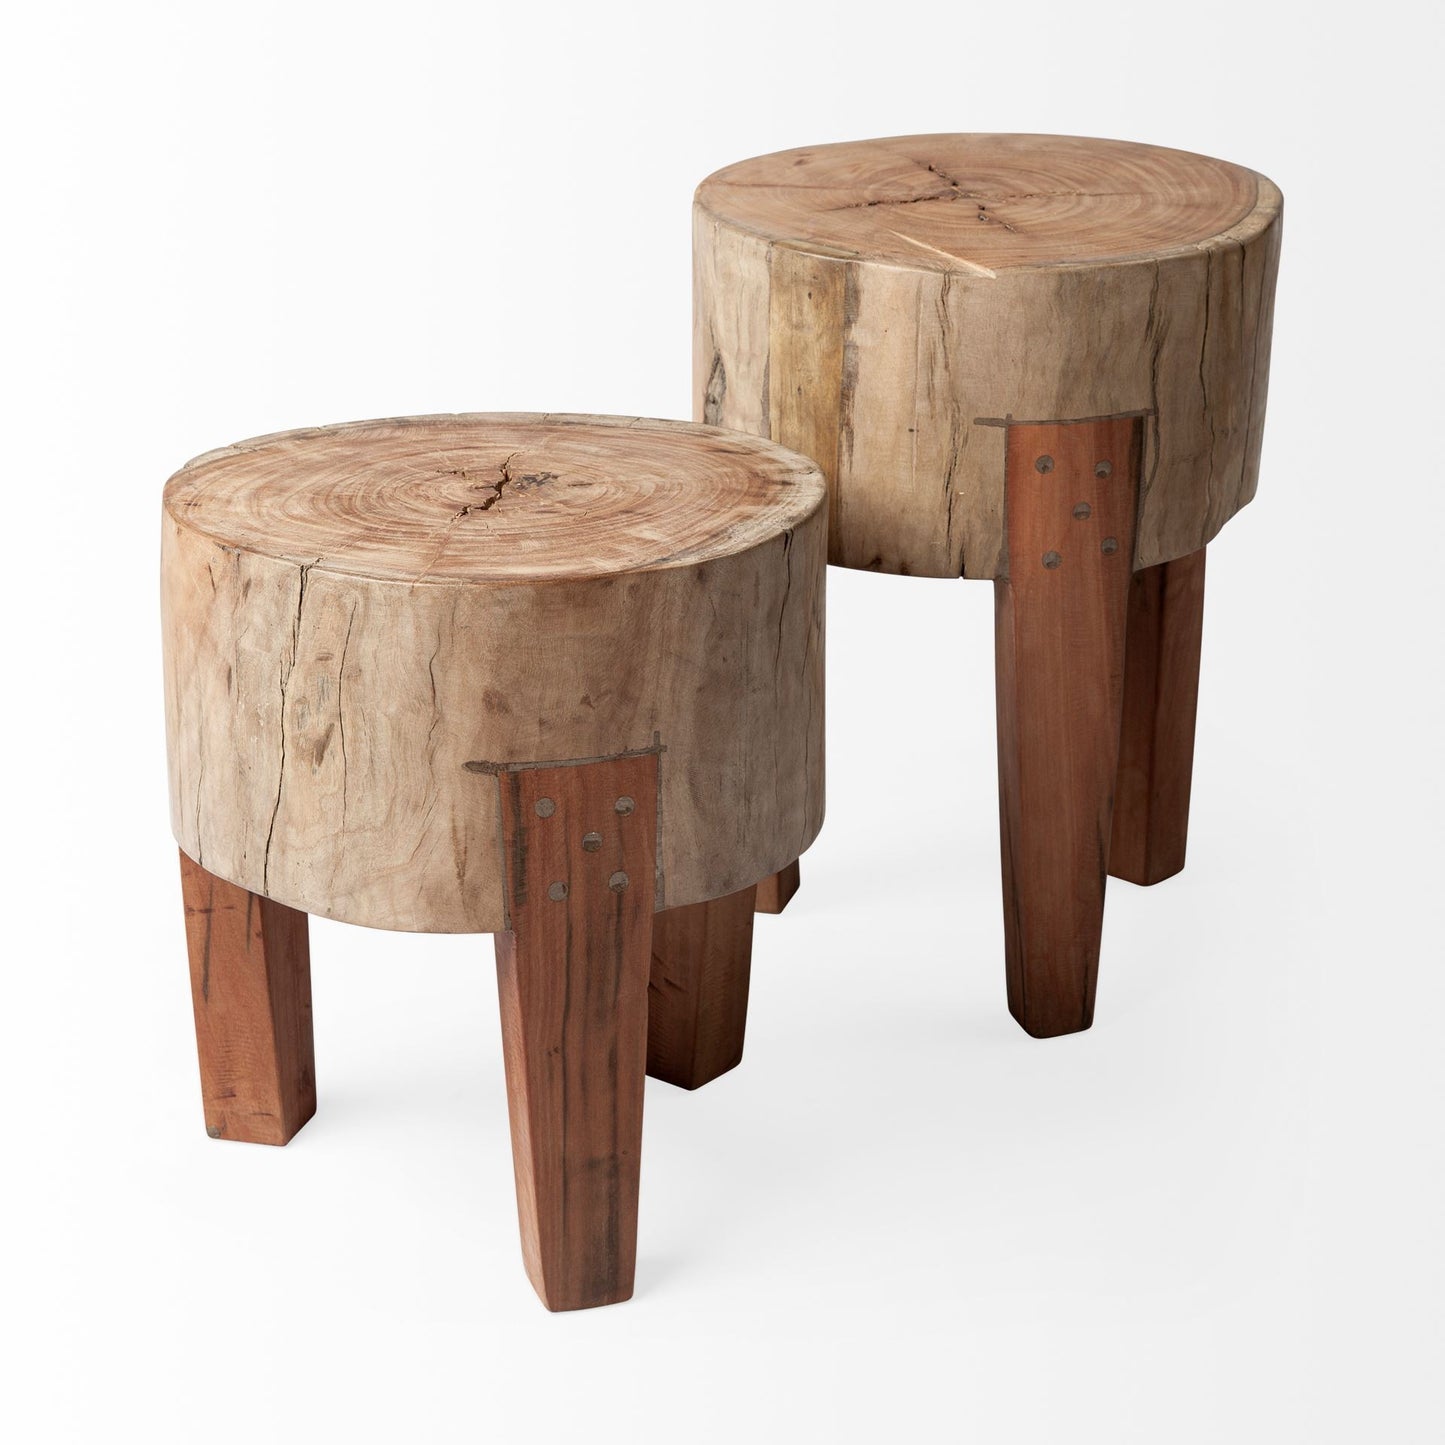 Modern Farmhouse 18' Reclaimed Wood Stool By Homeroots